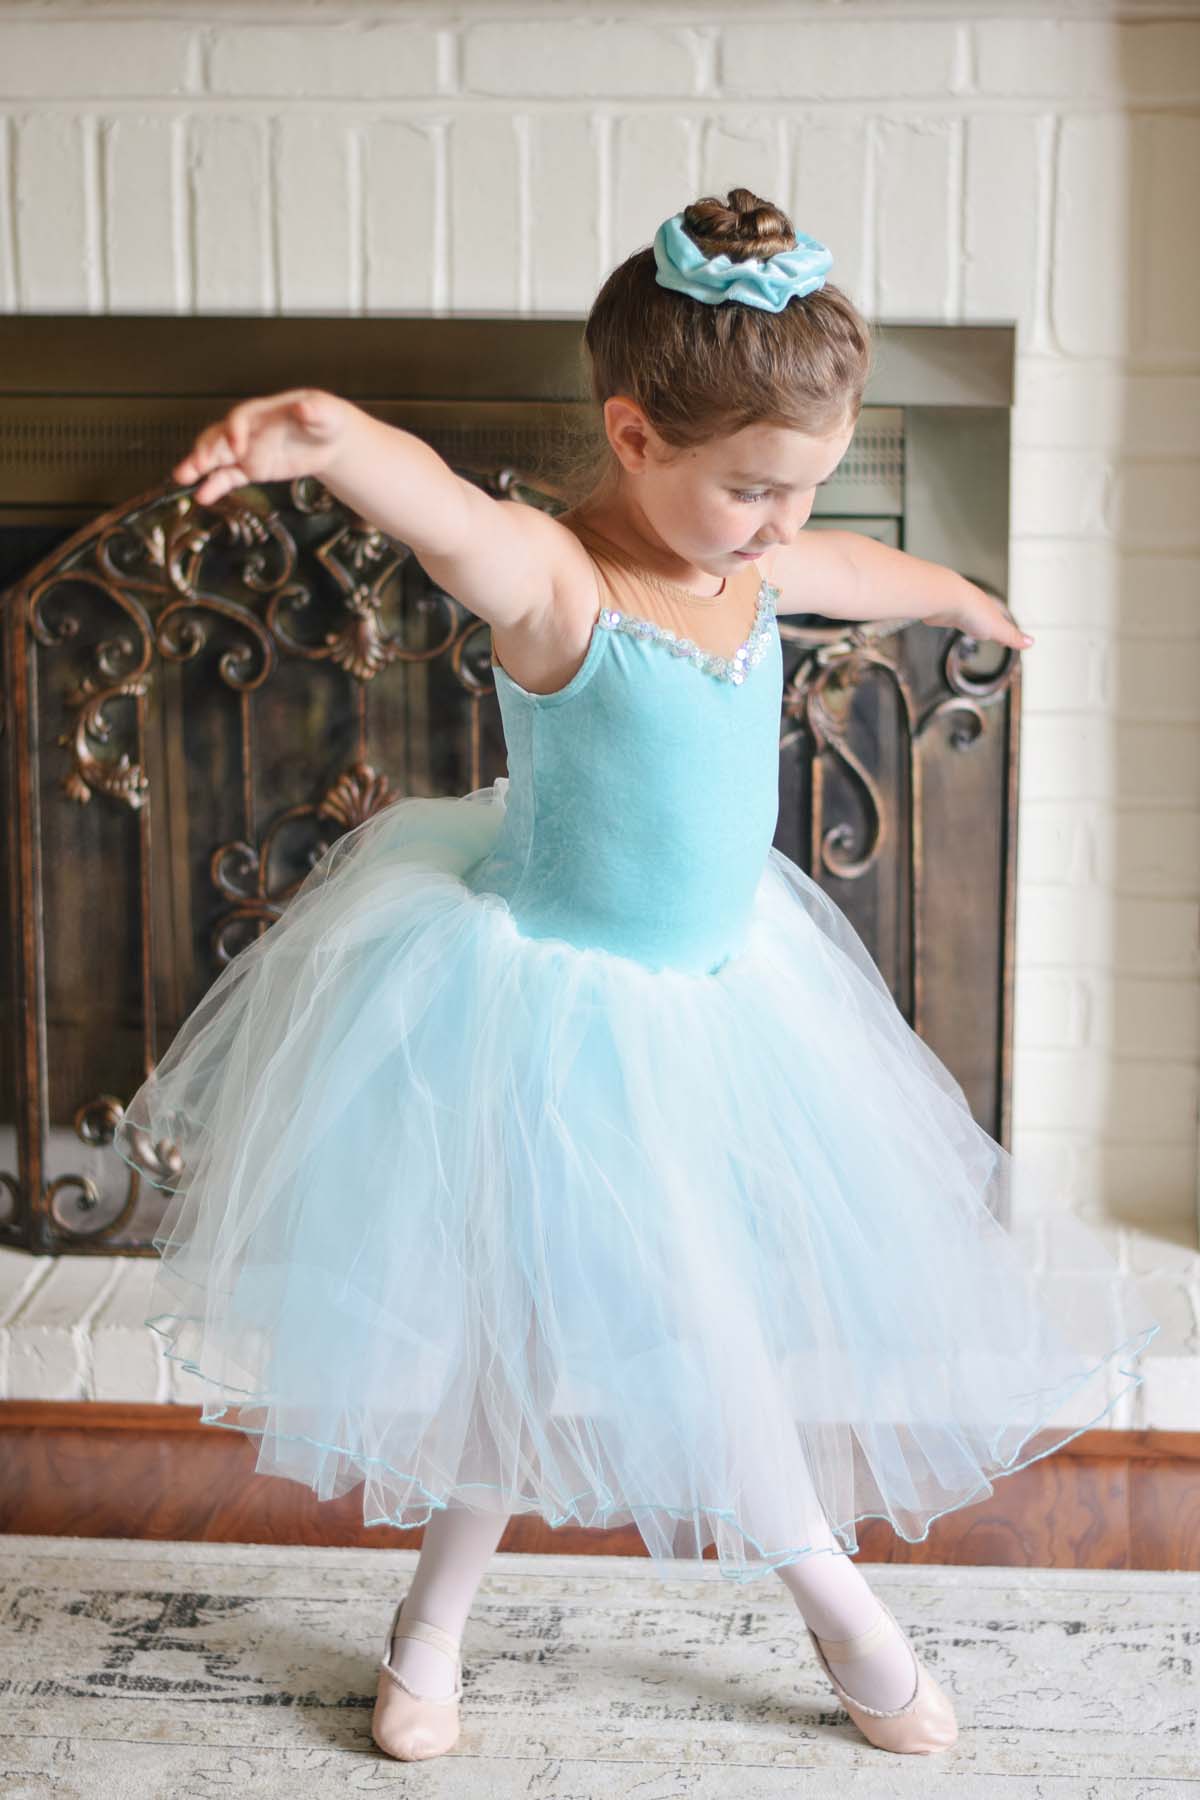 my tiny dancer… two years later!